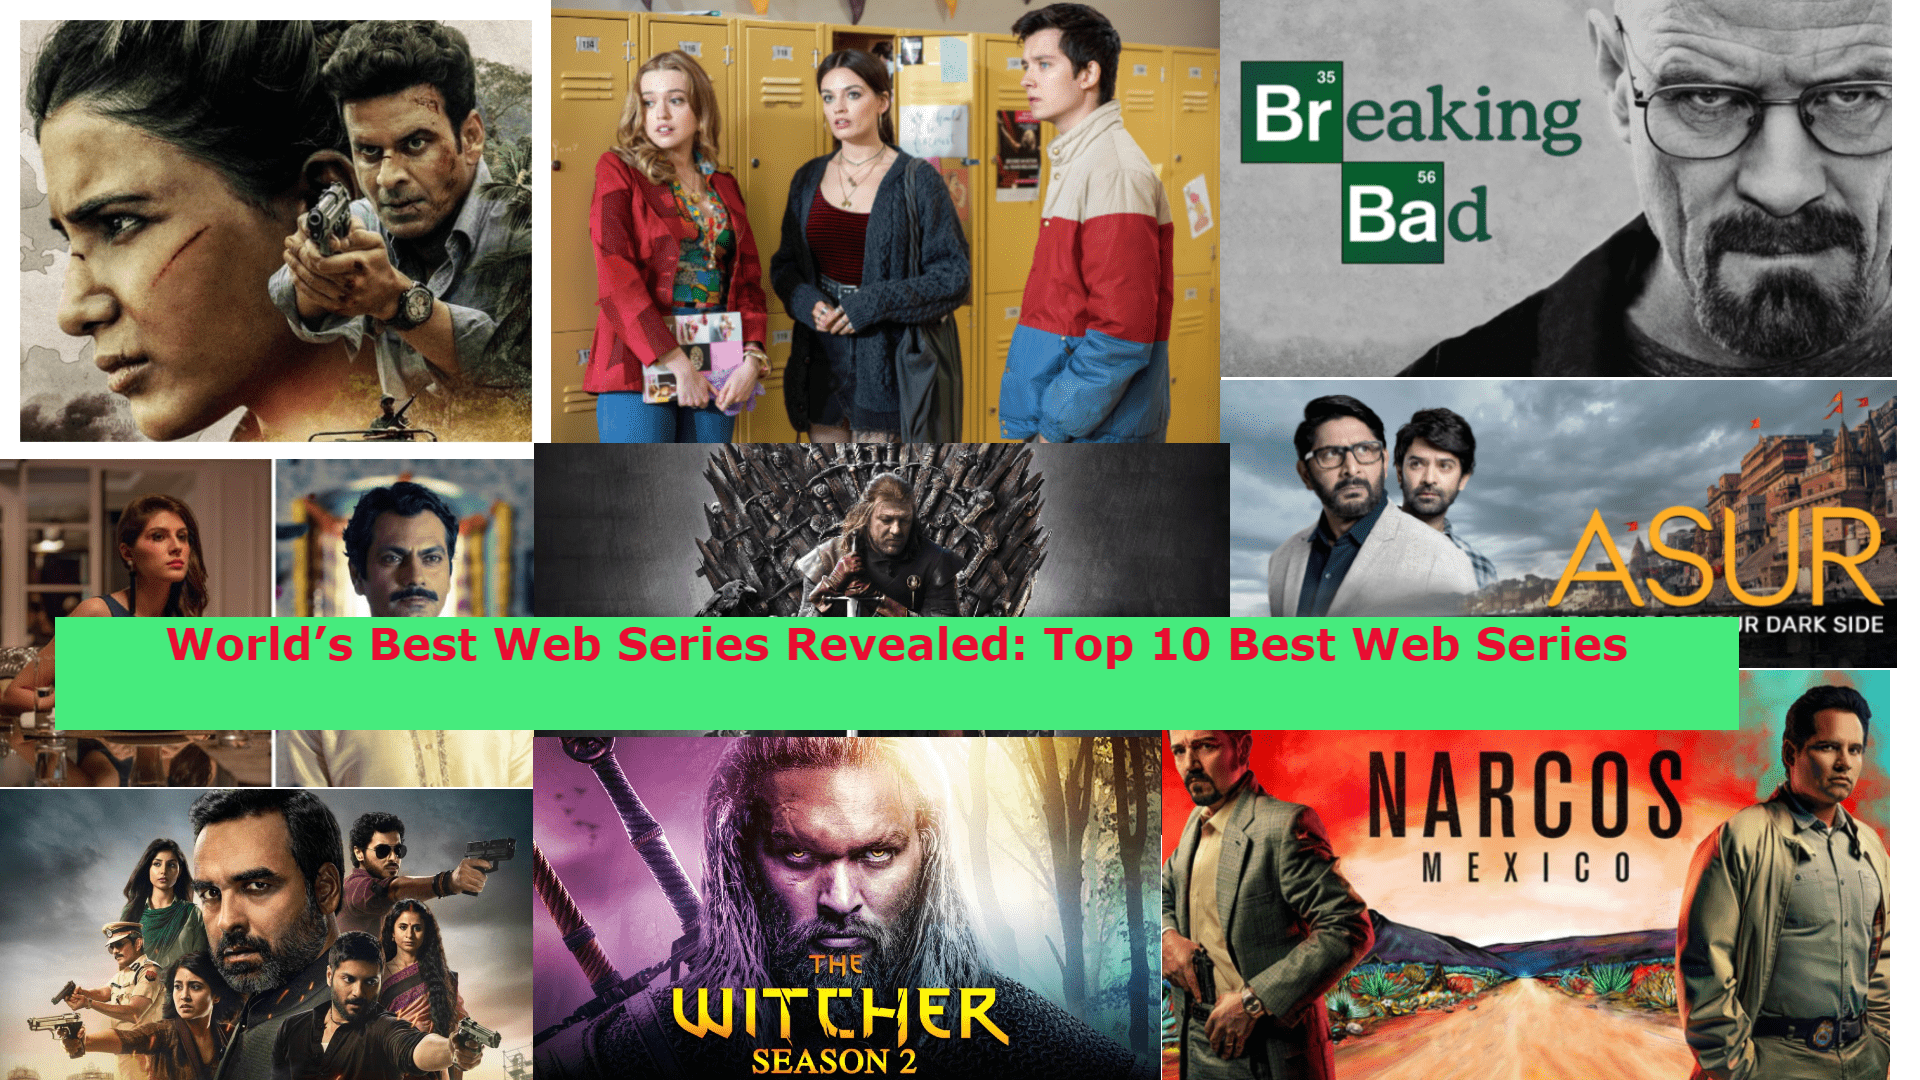 World’s Best Web Series Revealed Top 10 Best Web Series in The World